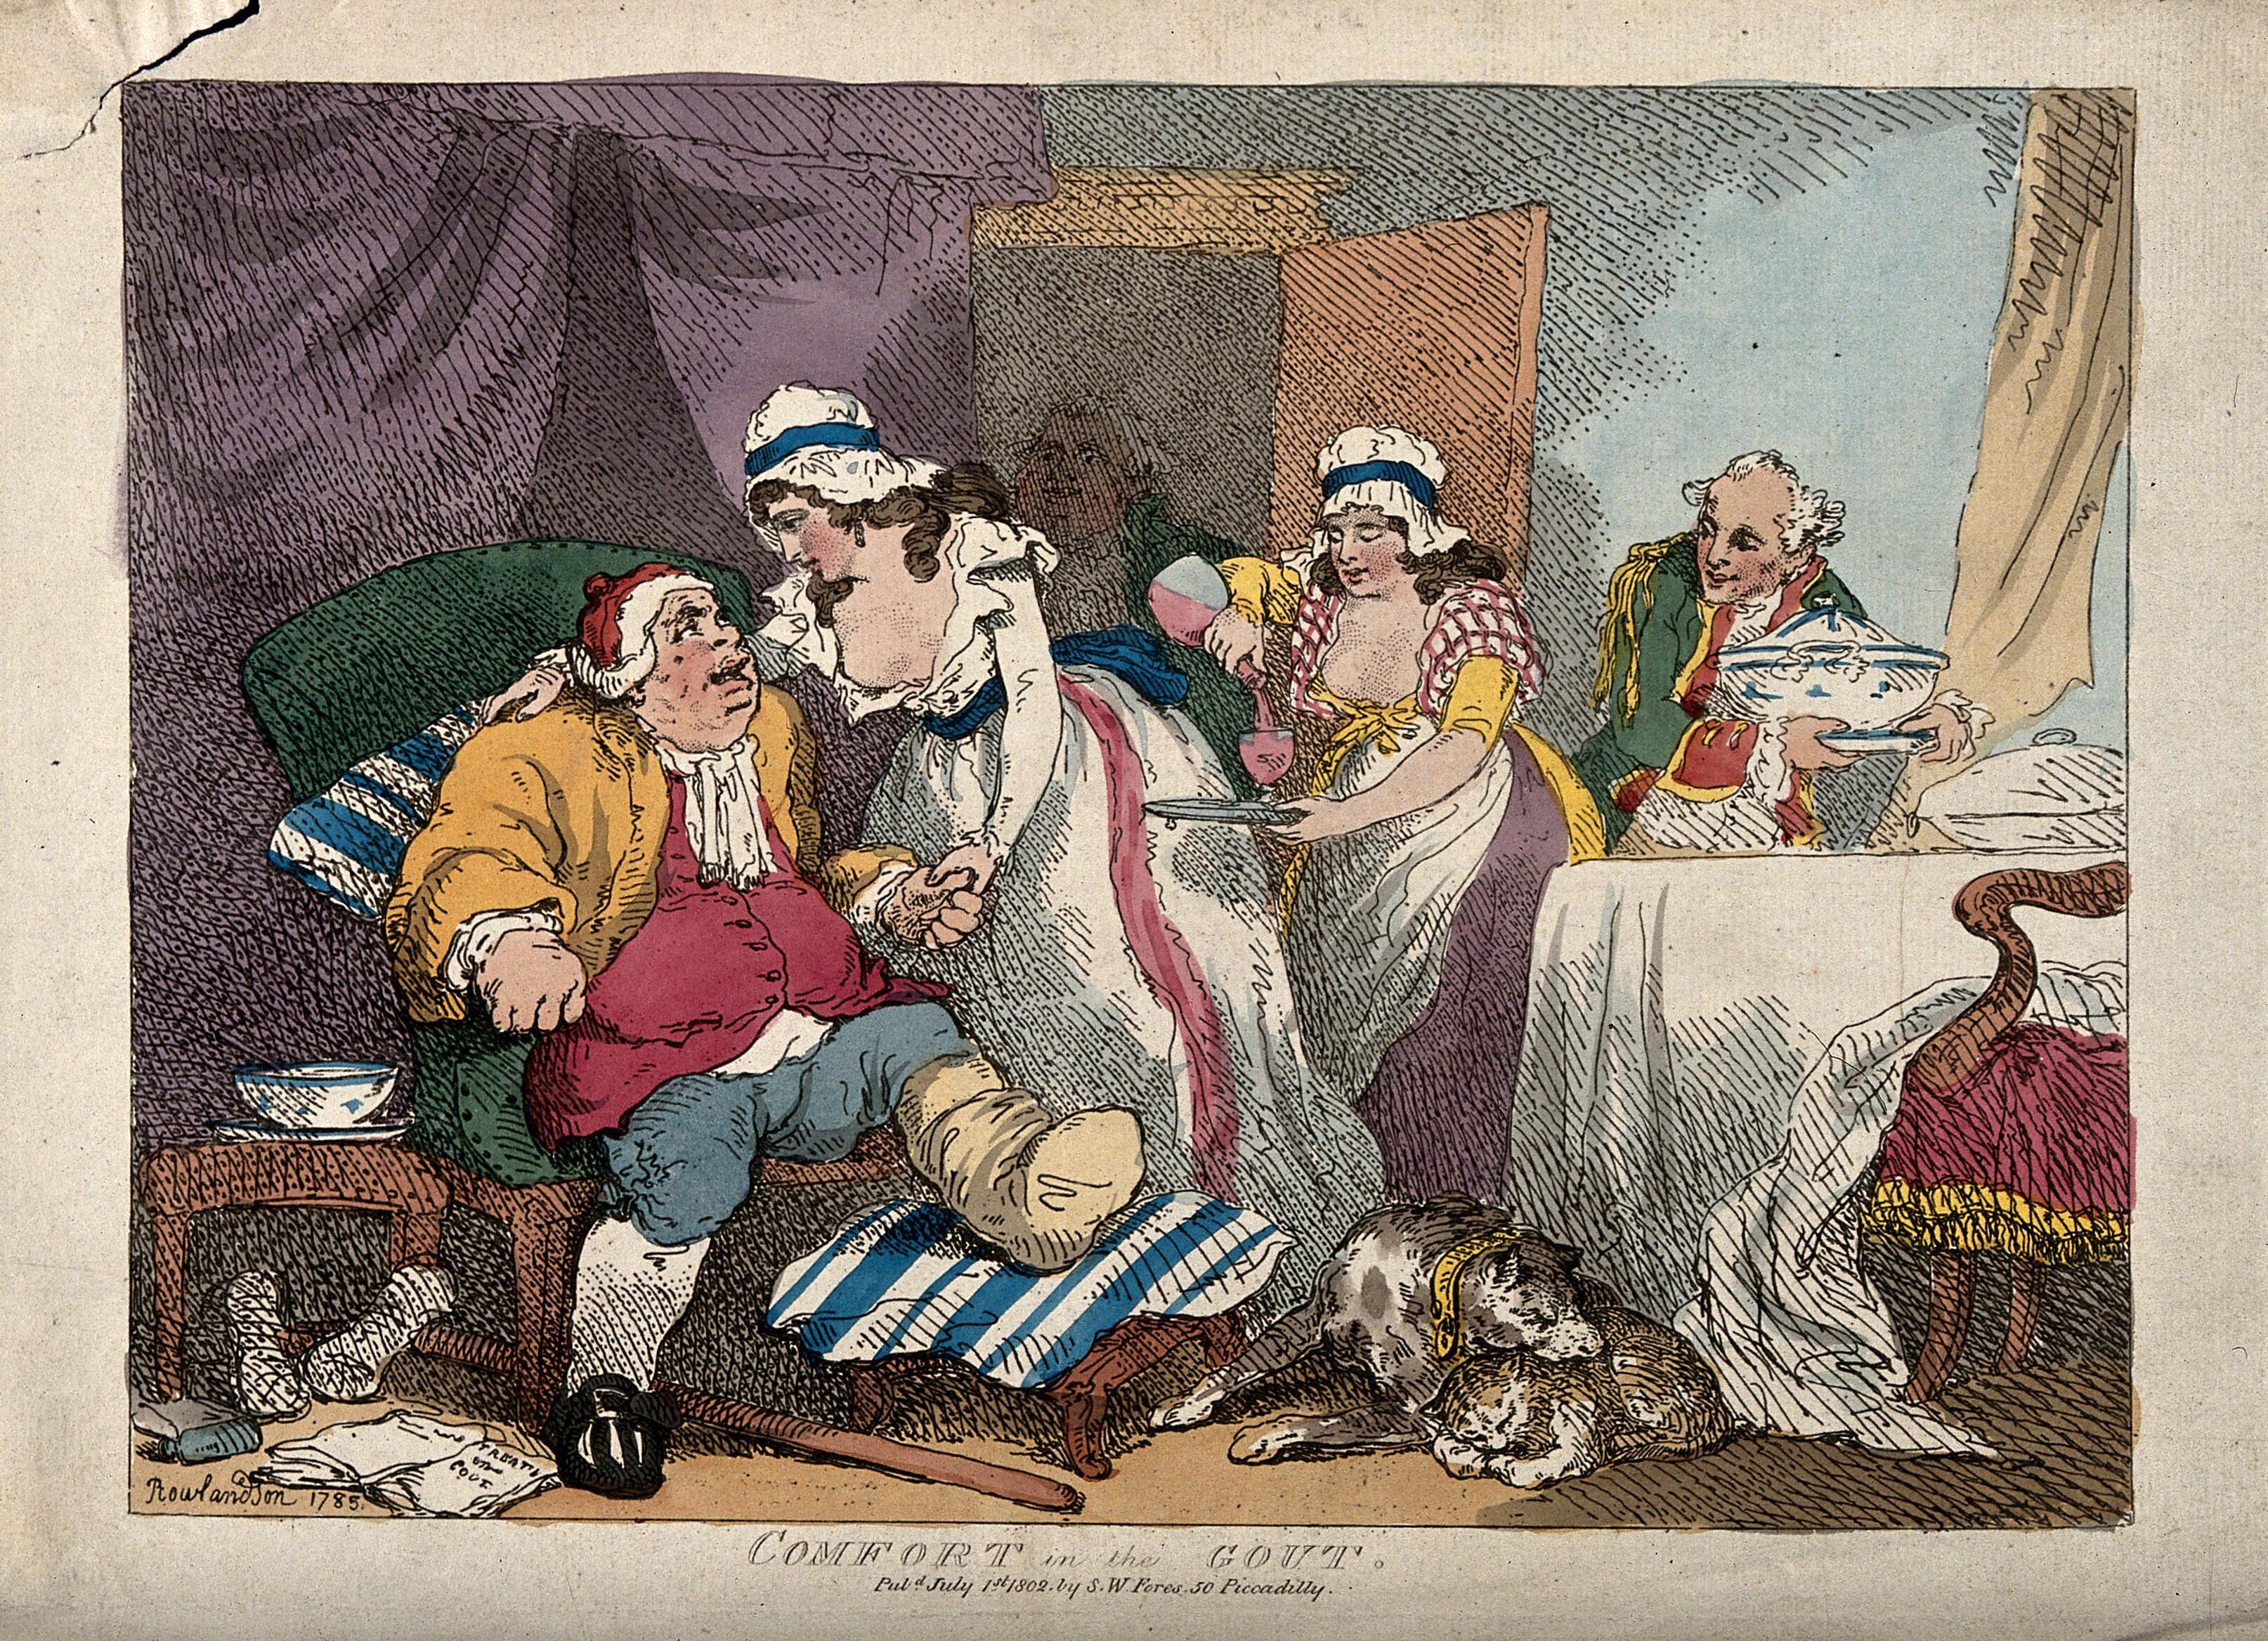  gouty man seeking comfort in licentious surroundings. Coloured etching by T. Rowlandson, 1785. Wellcome Collection